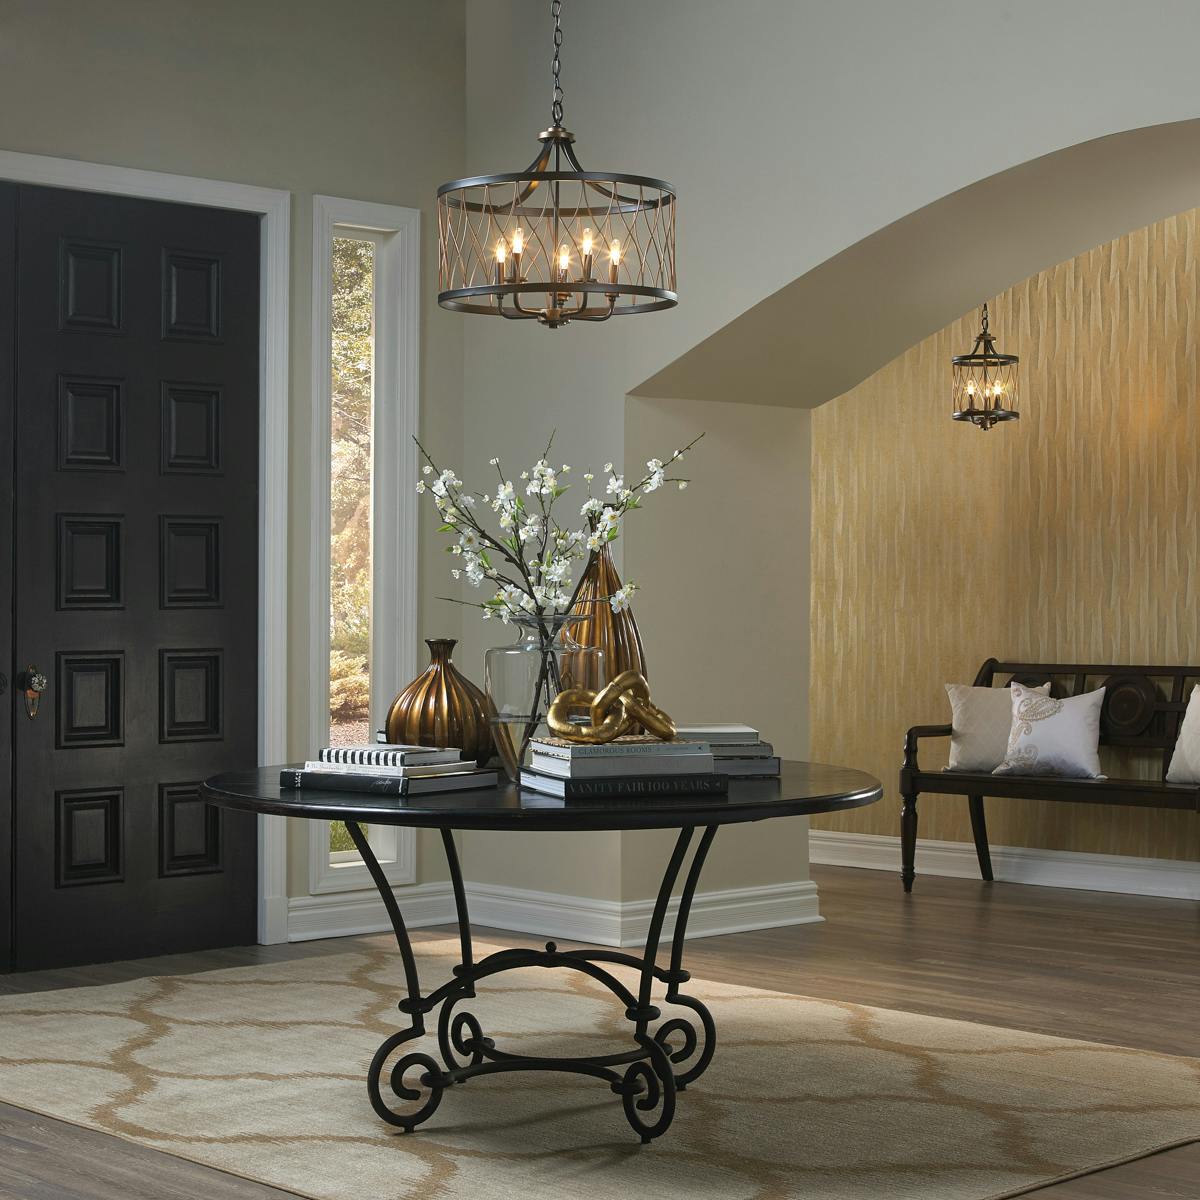 Foyer featuring Brookglen 34781 and 34779